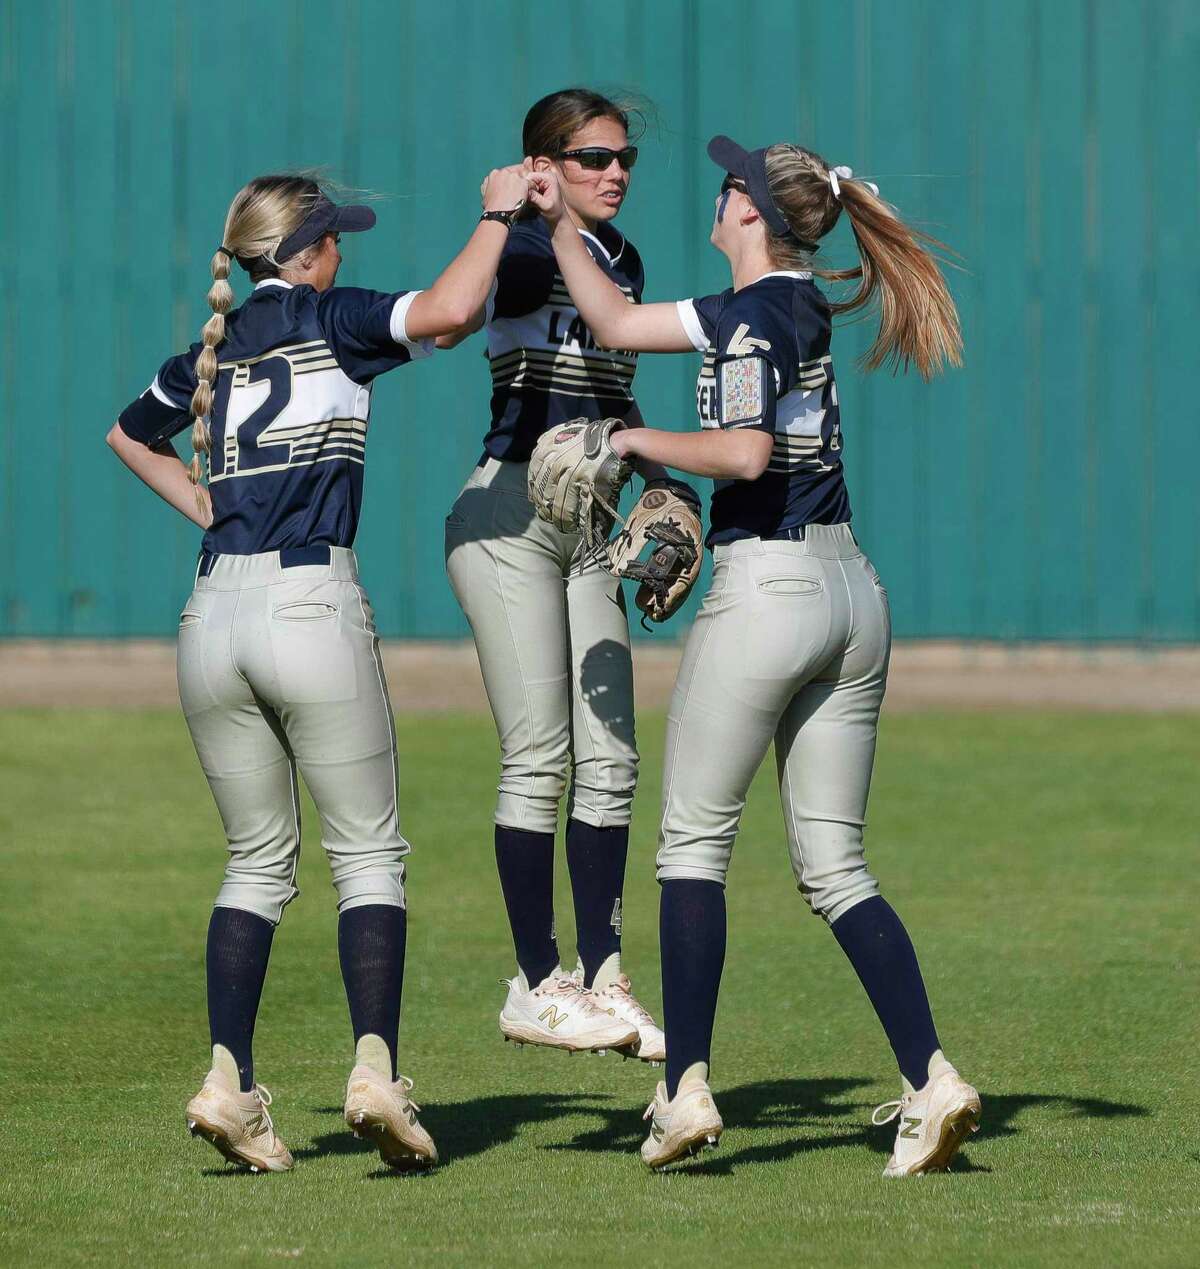 Lake Creek left fielder Piper White, center fielder Carmen Uribe and right fielder Shelby Winn gather before the first inning of a District 20-5A high school softball game, Tuesday, March 15, 2022, in Montgomery.